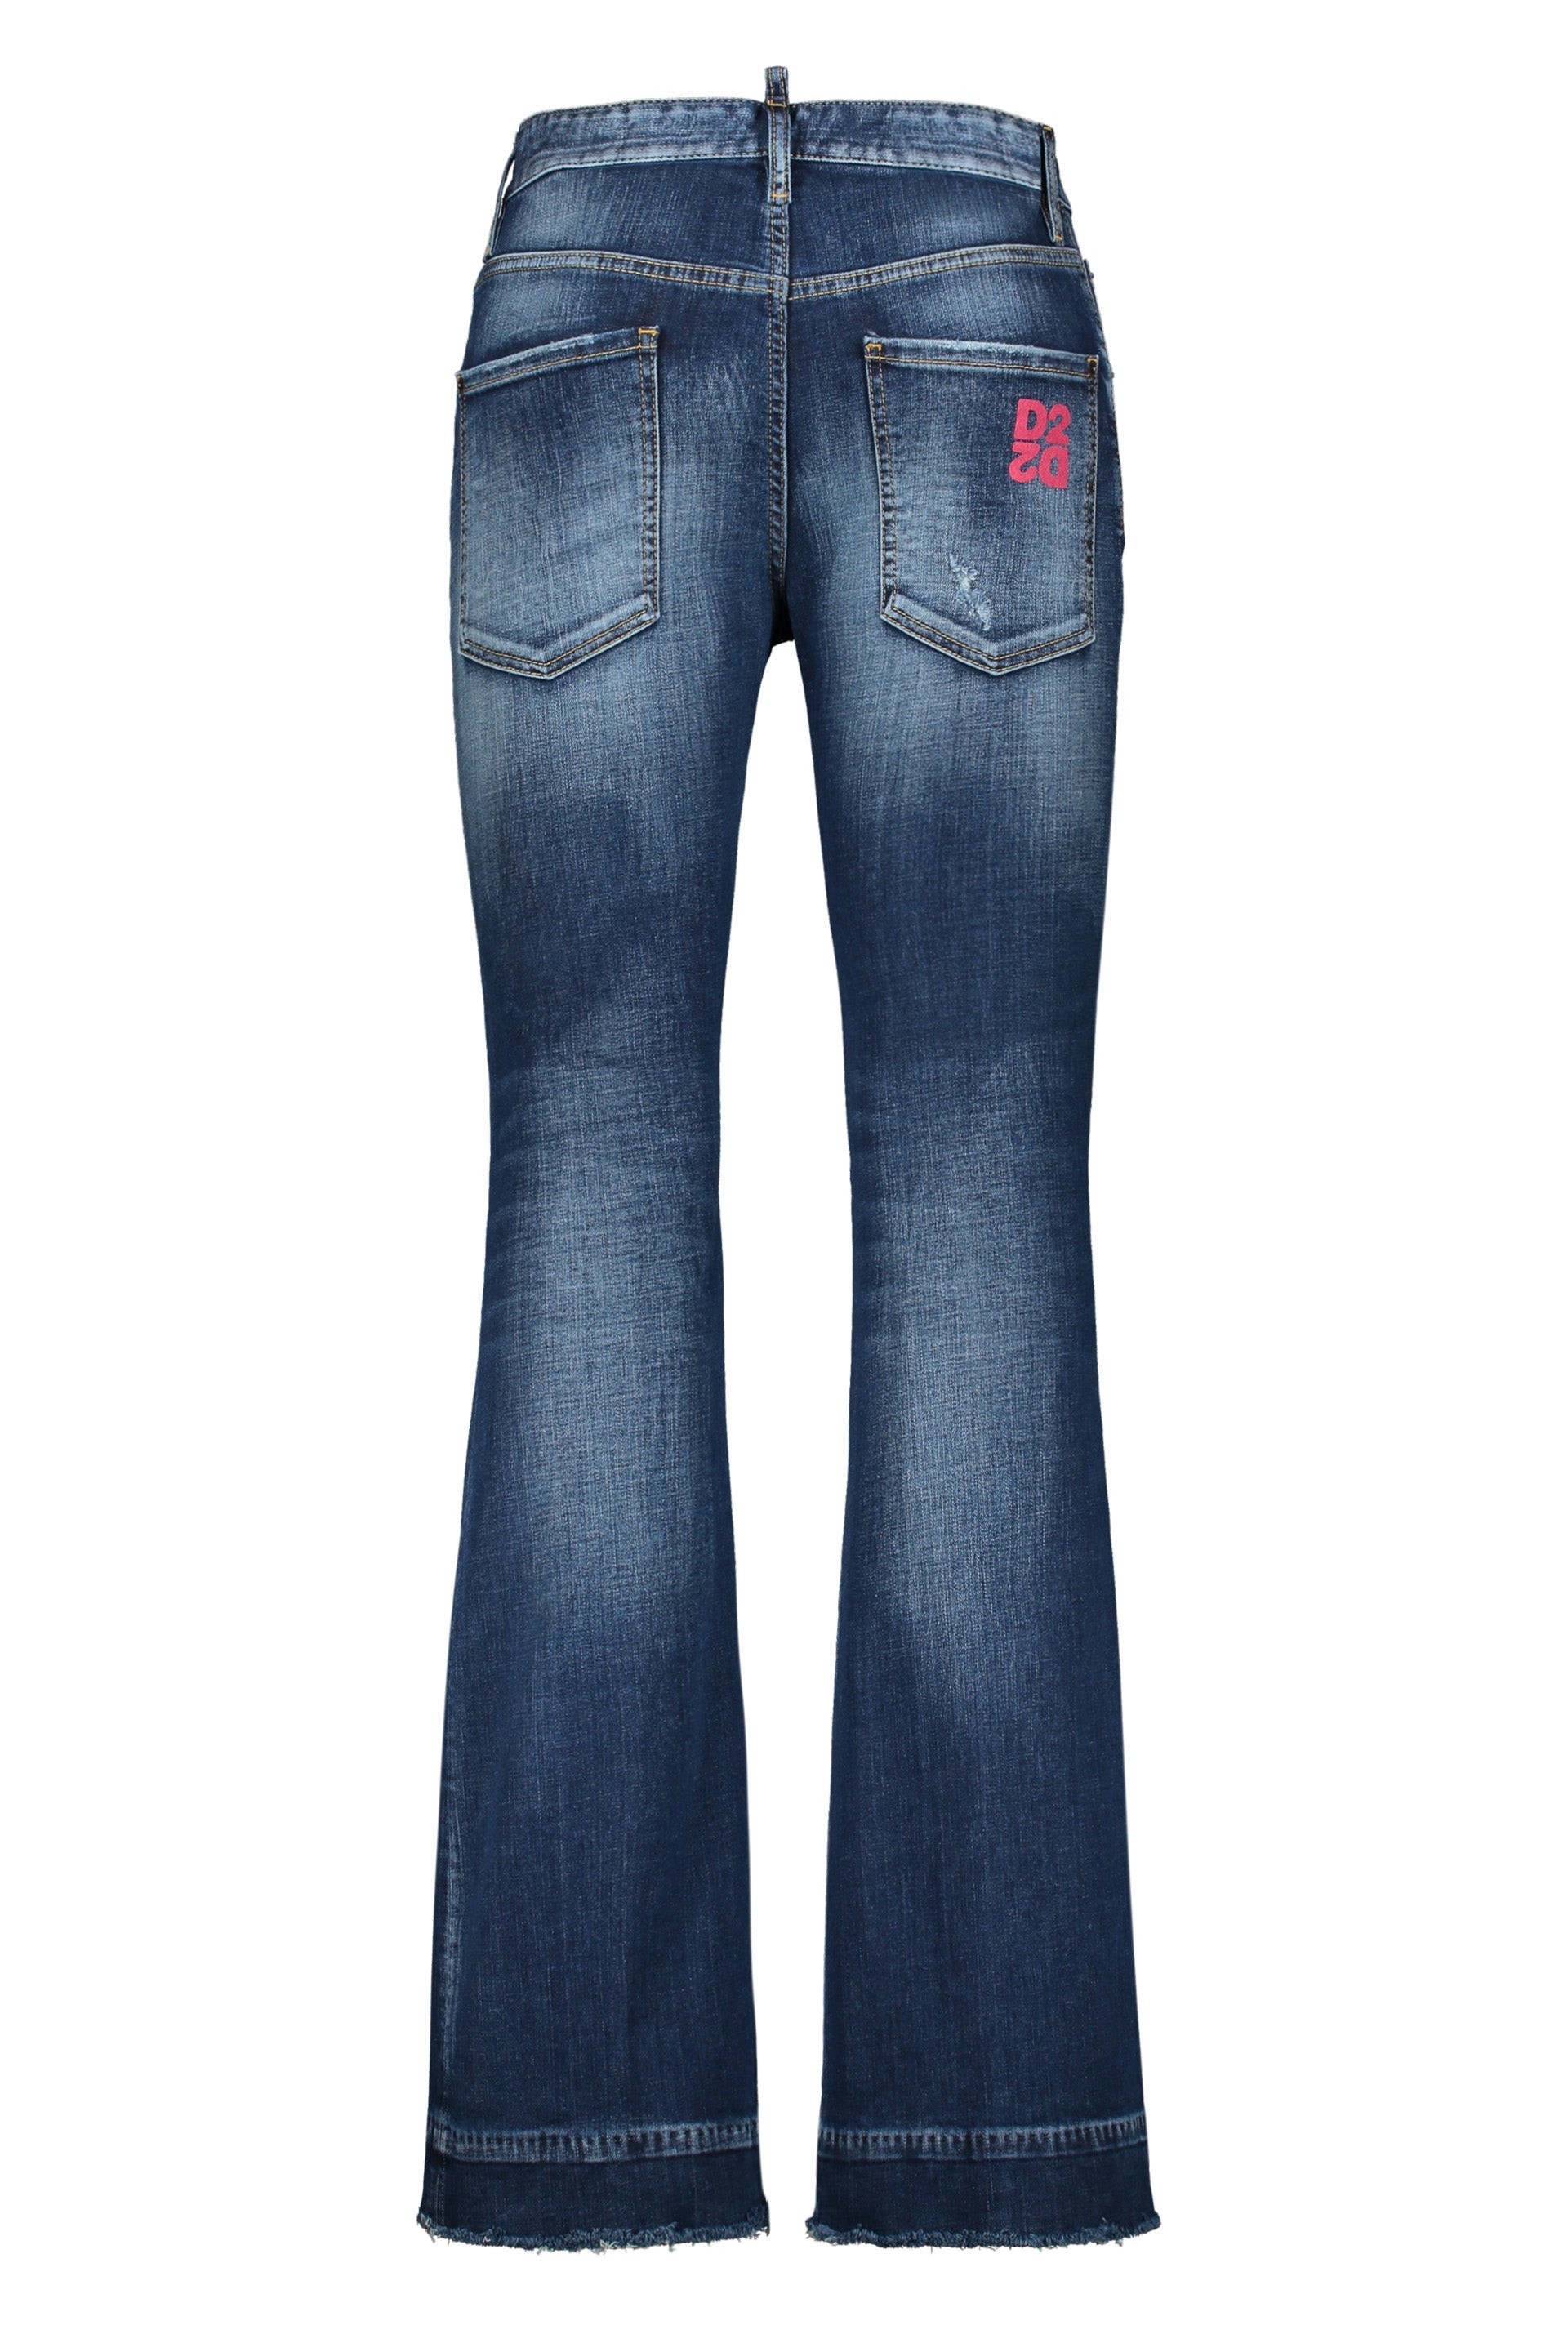 Dsquared2-OUTLET-SALE-Boot-cut-jeans-Jeans-ARCHIVE-COLLECTION-2.jpg